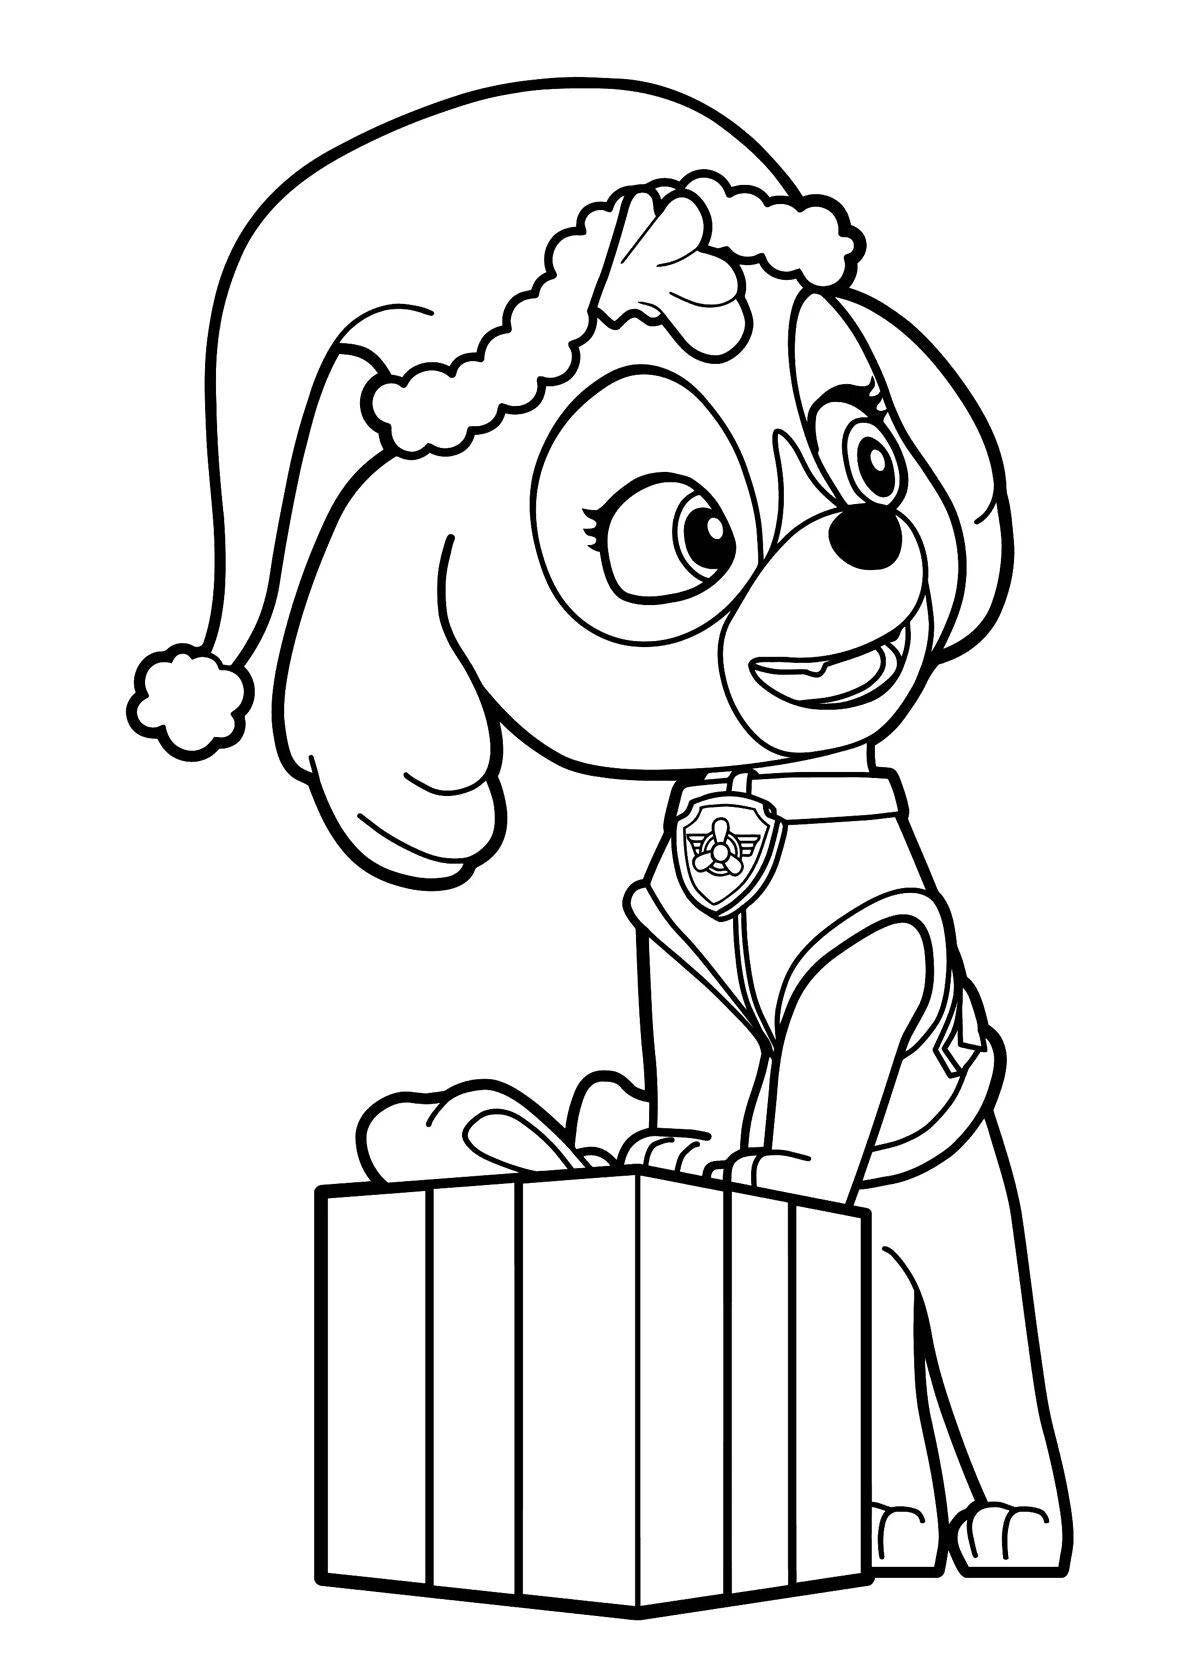 Skye puppy coloring page